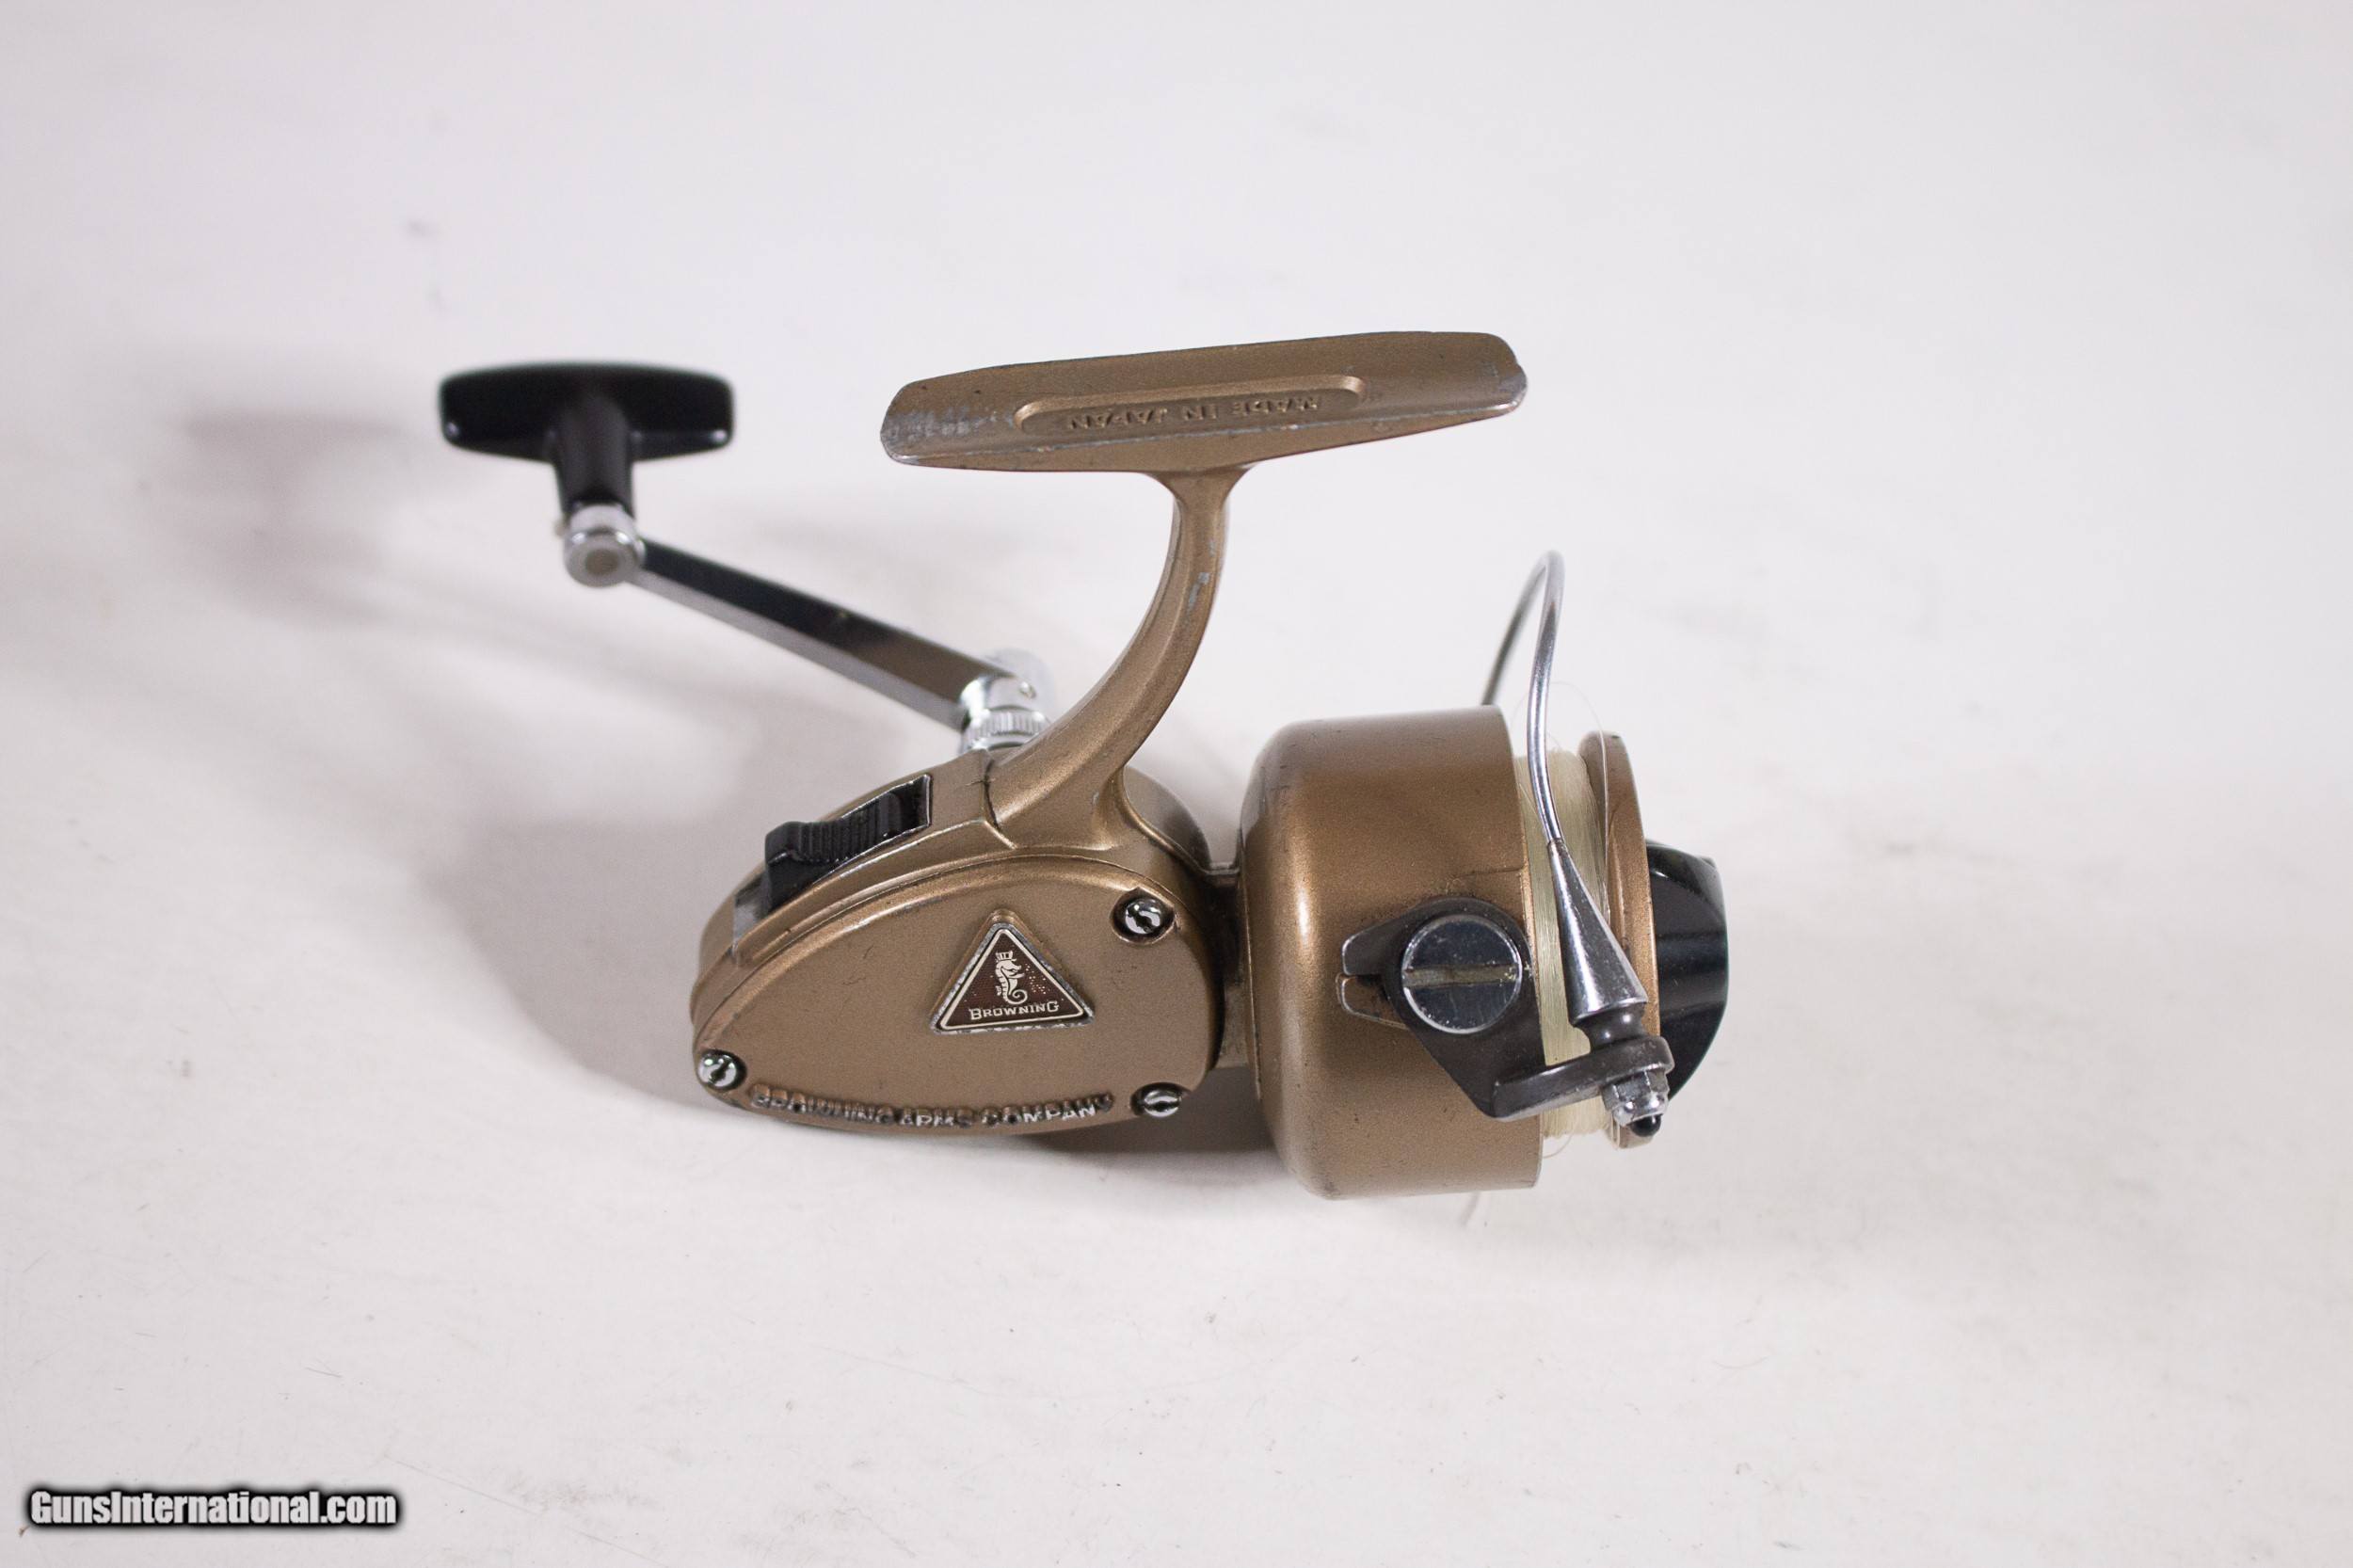 RARE VINTAGE BROWNING Arms Company Spinning Reel - 5430 - Made In Japan  $40.00 - PicClick